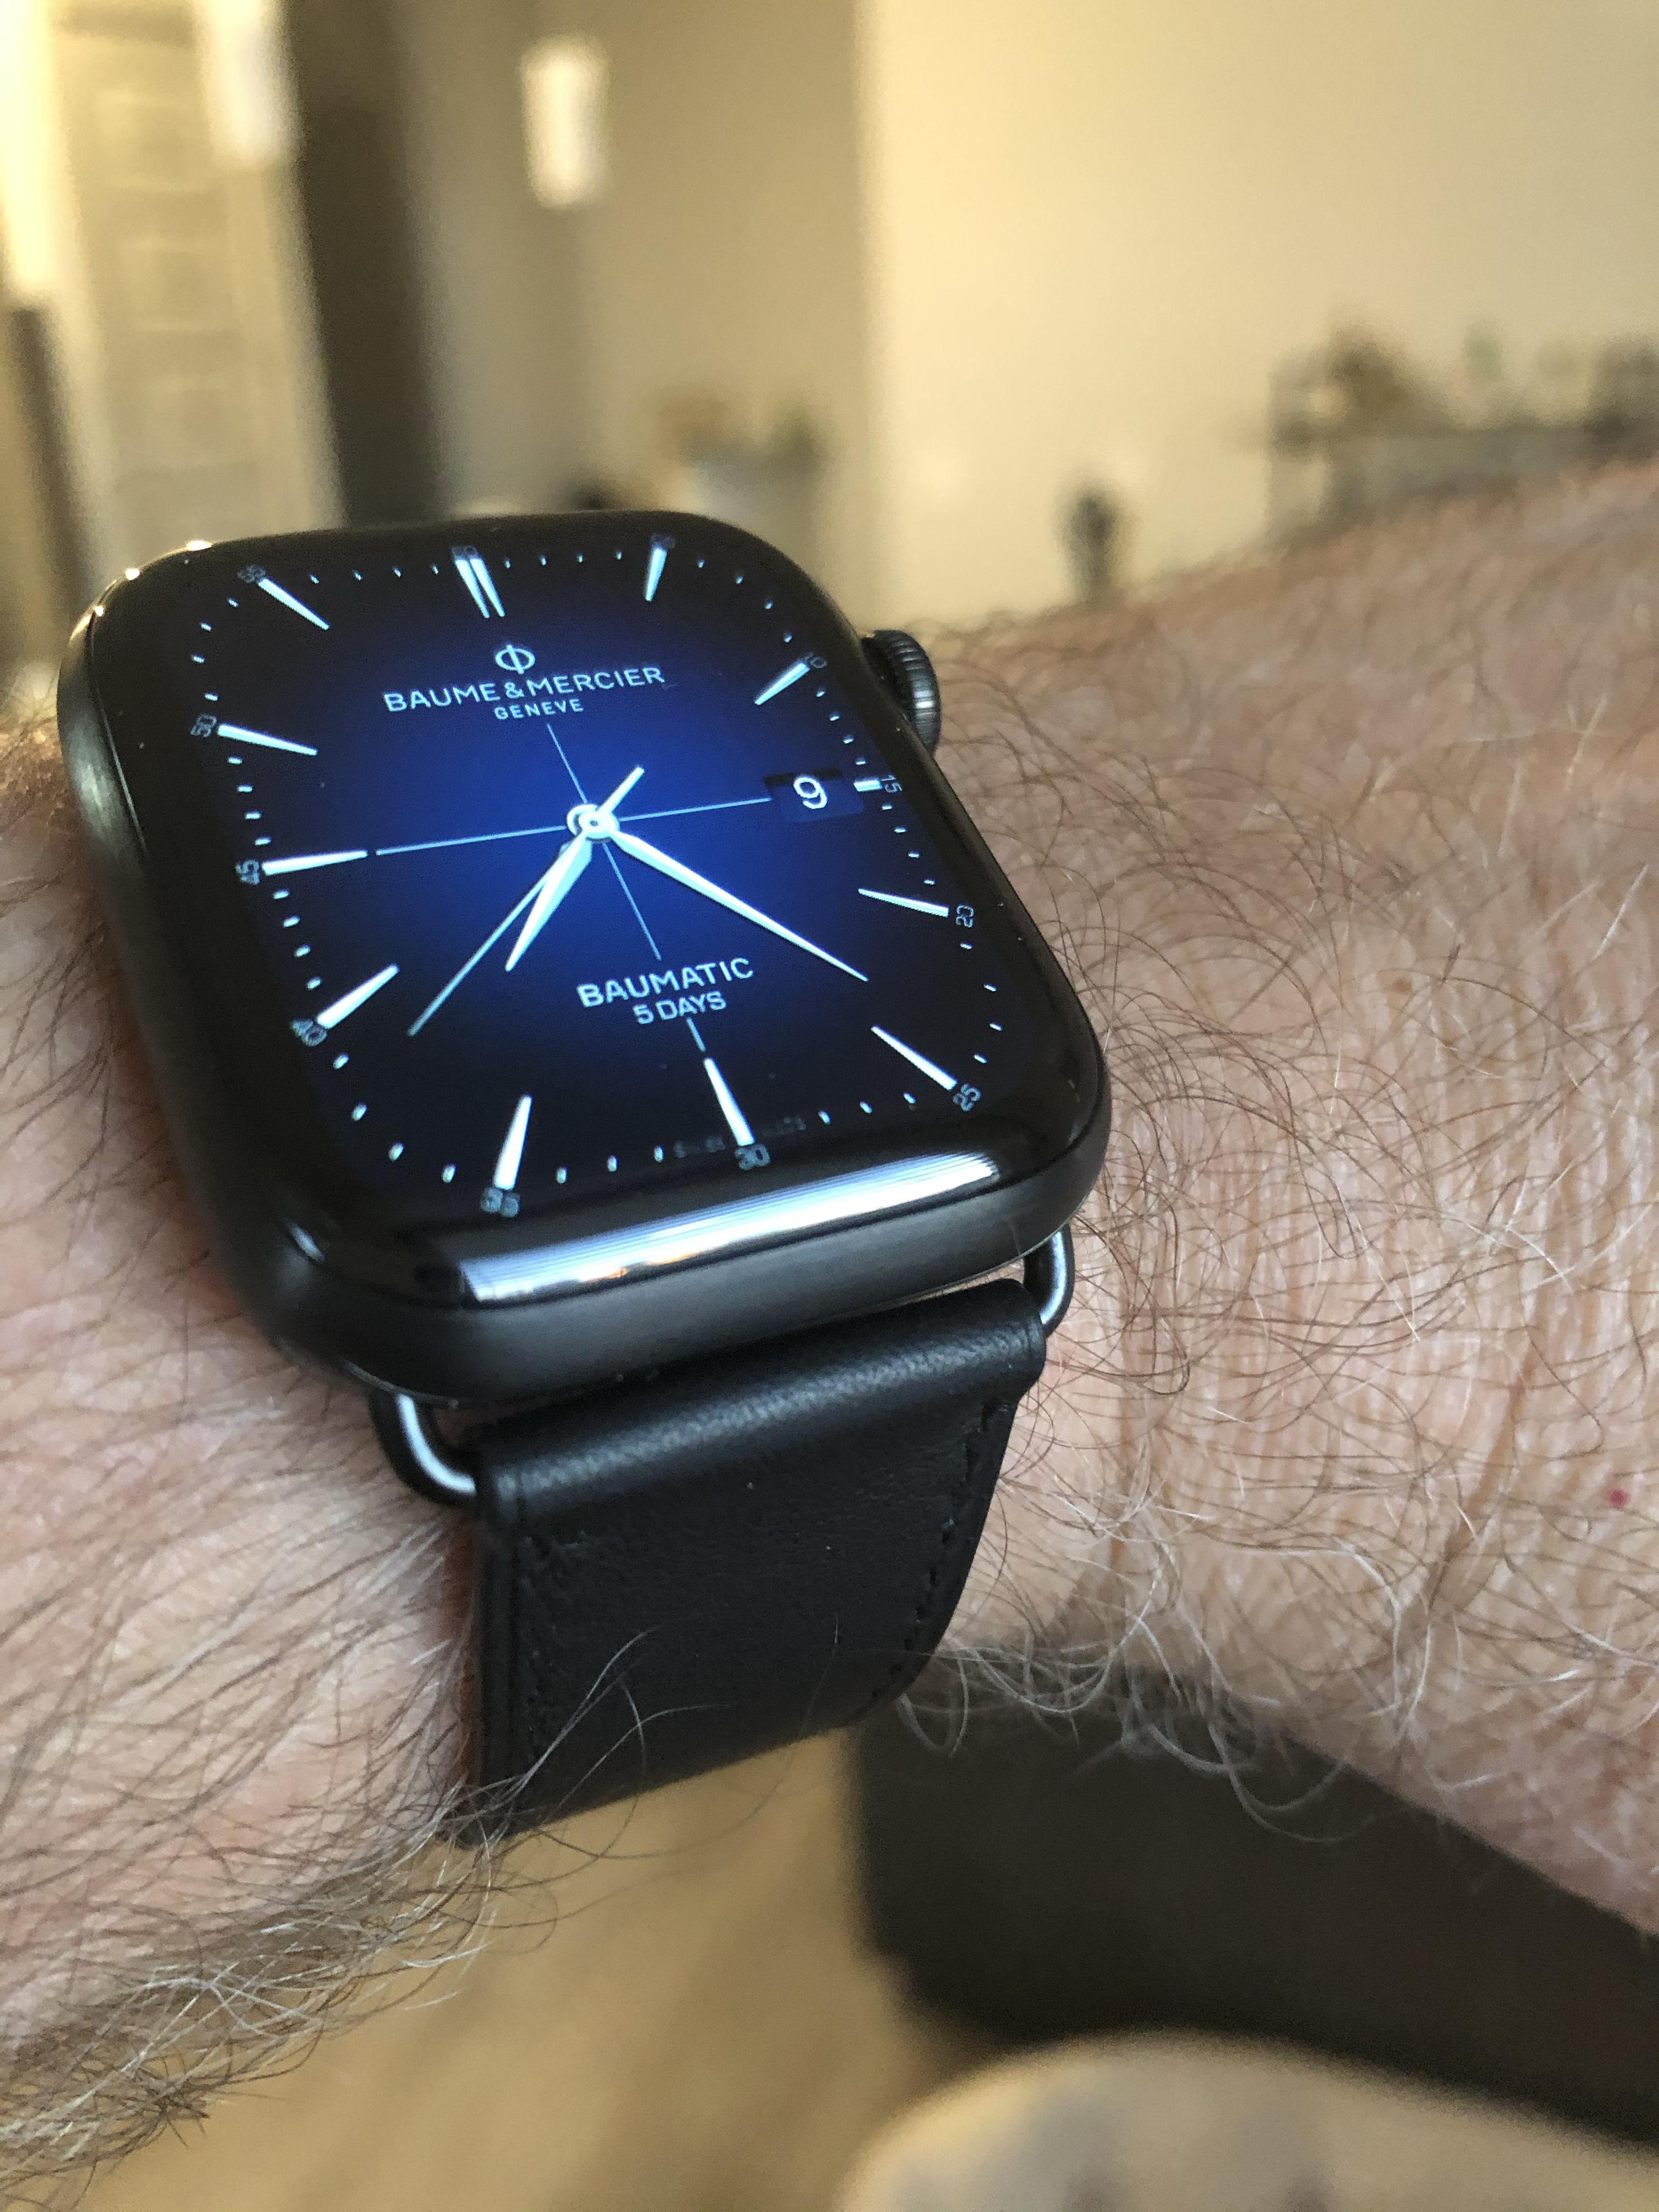 Show off your Apple Watch | Page 583 | MacRumors Forums